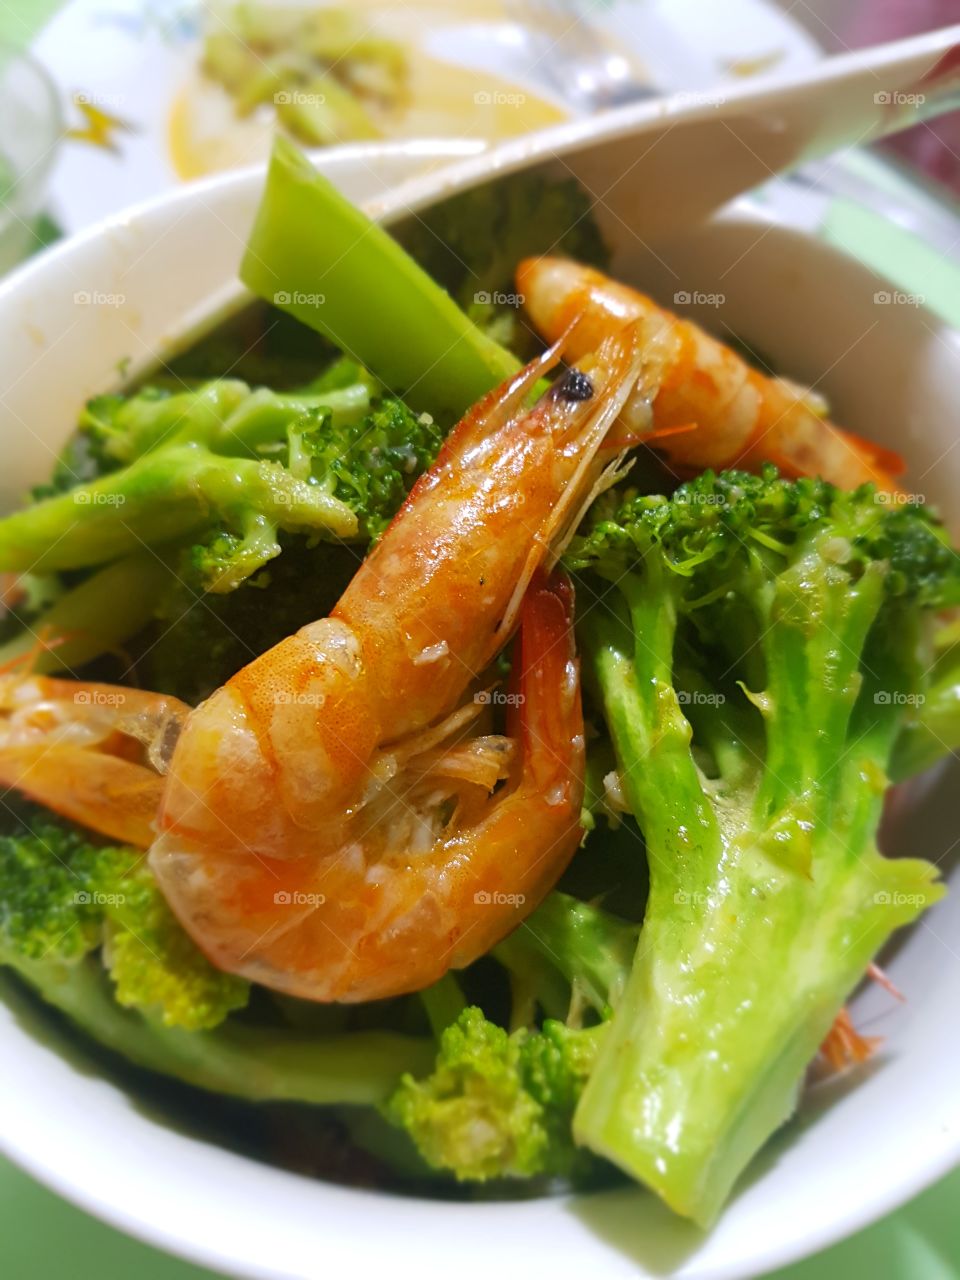 awesome dish! buttered shrimp with brocolli